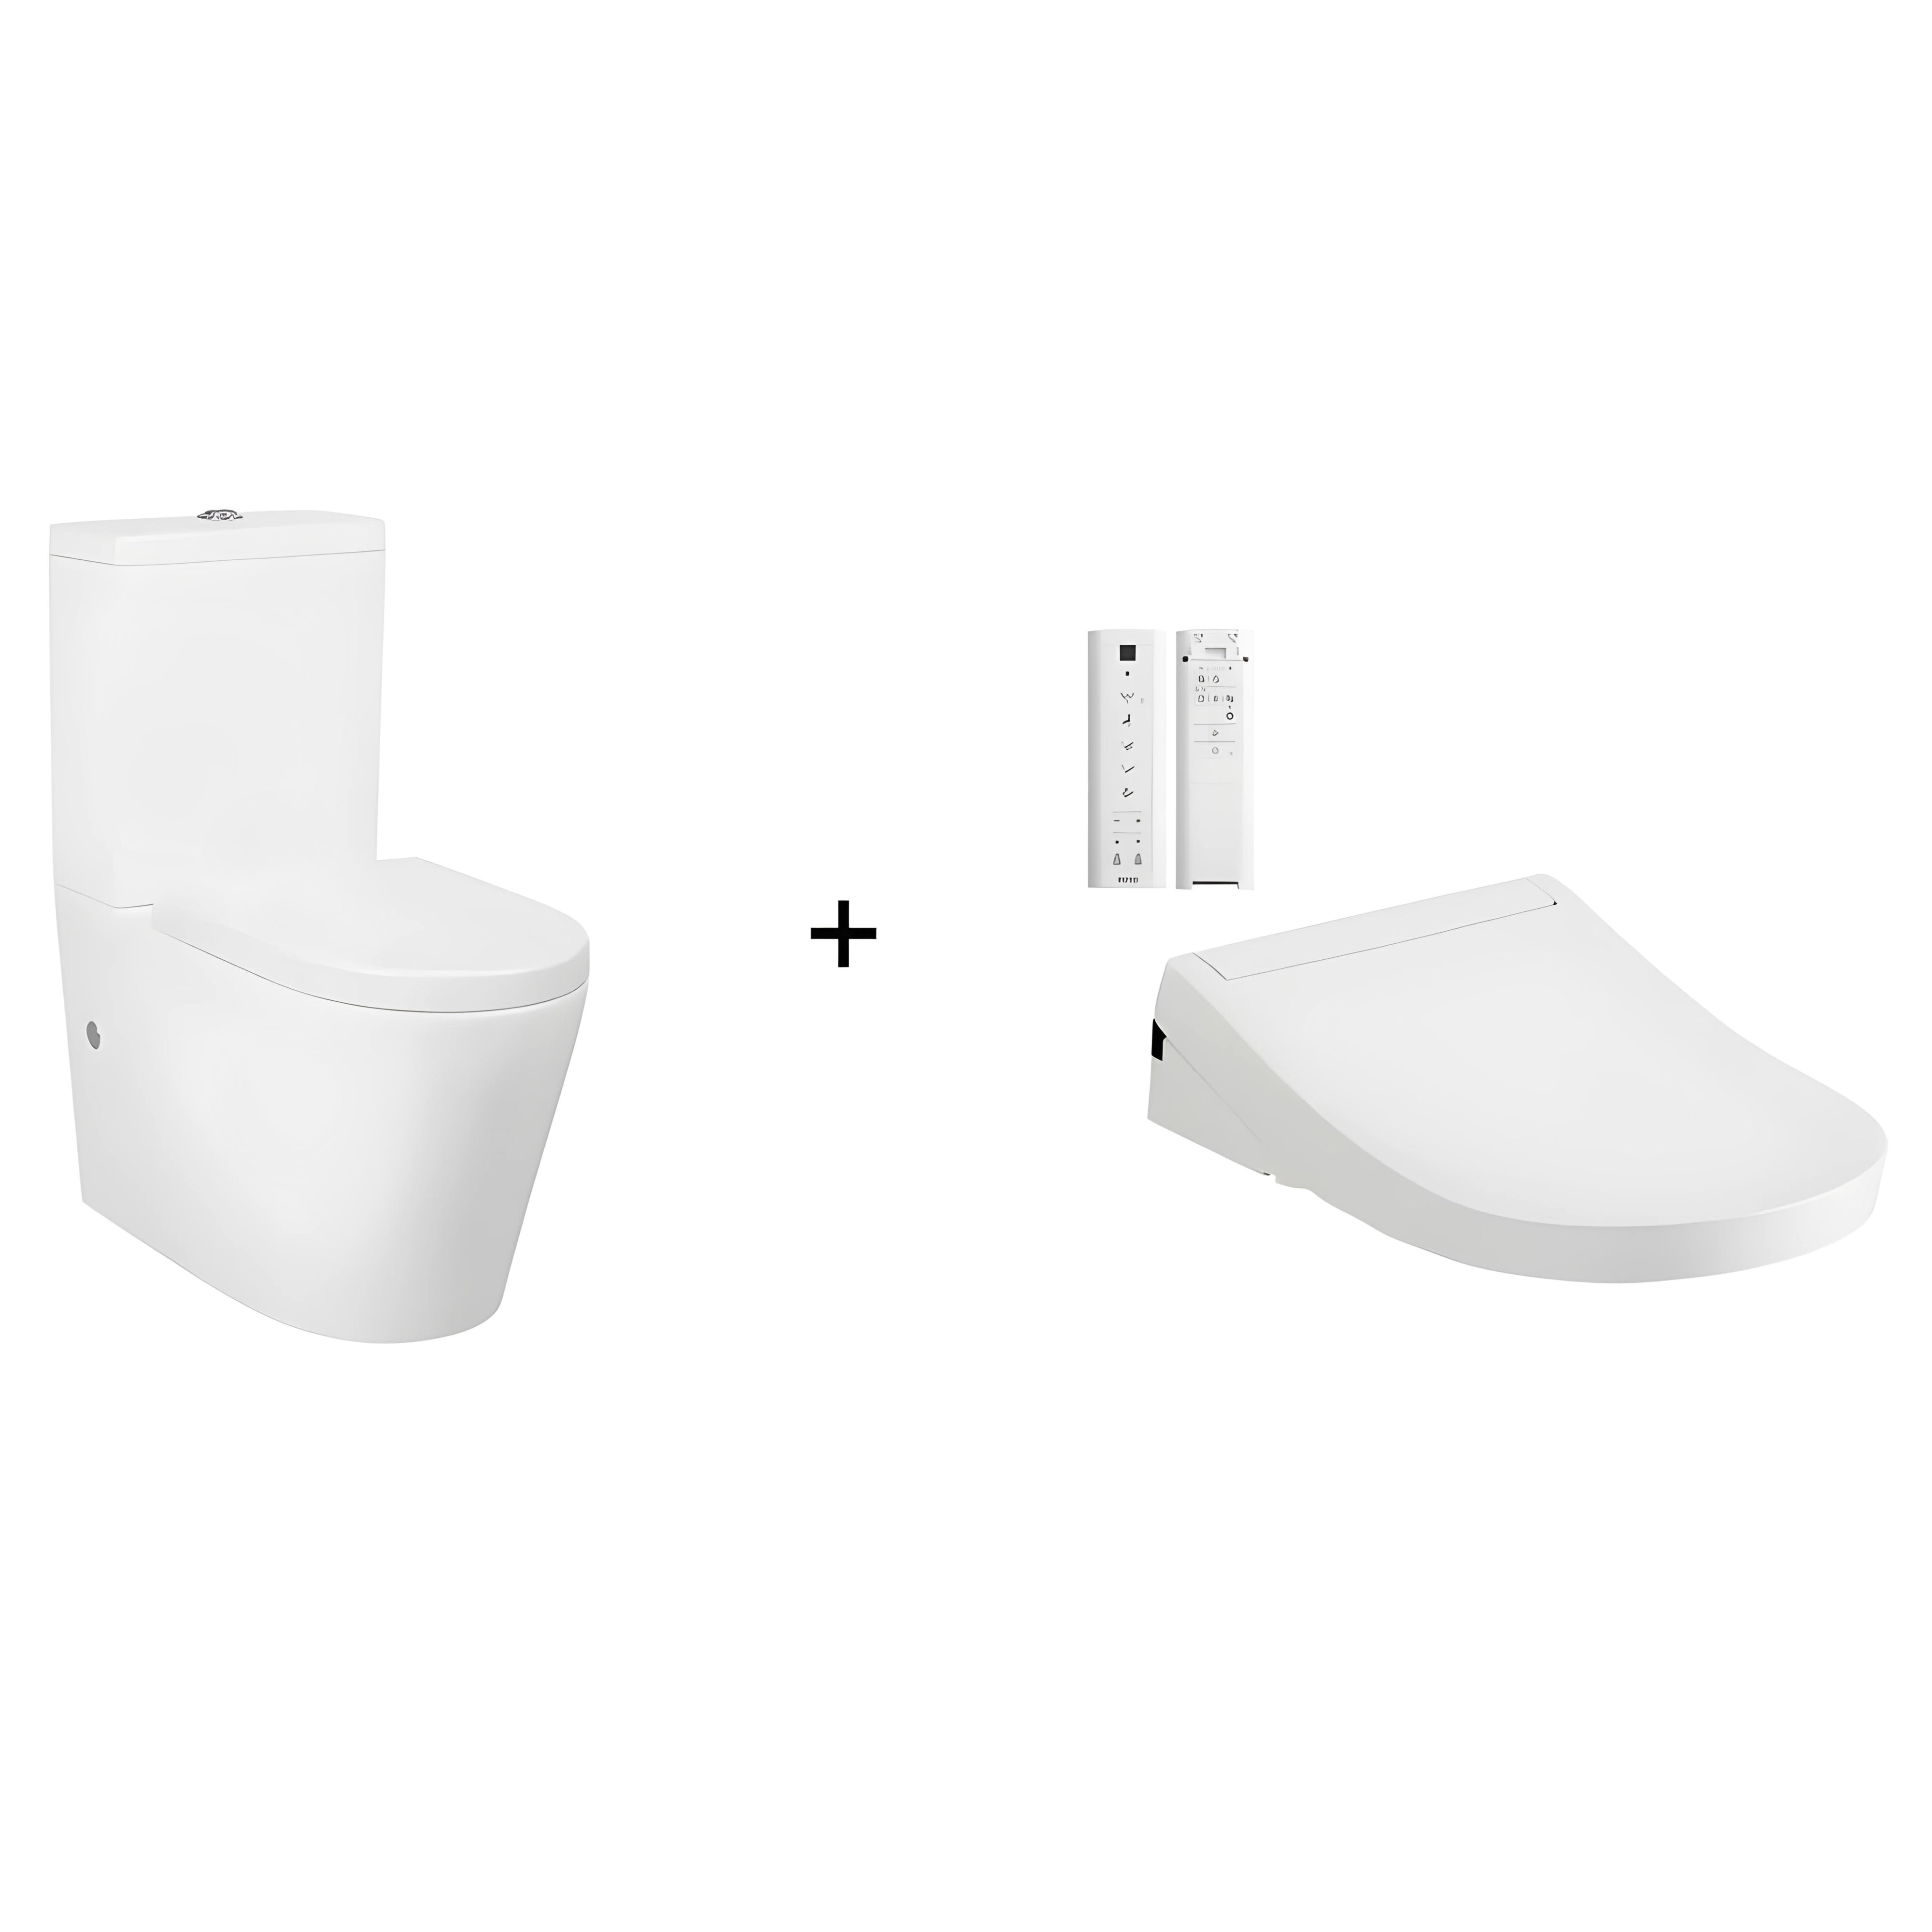 TOTO S5 WASHLET W/ REMOTE CONTROL AND RIMLESS BTW TOILET SUITE PACKAGE D-SHAPED GLOSS WHITE